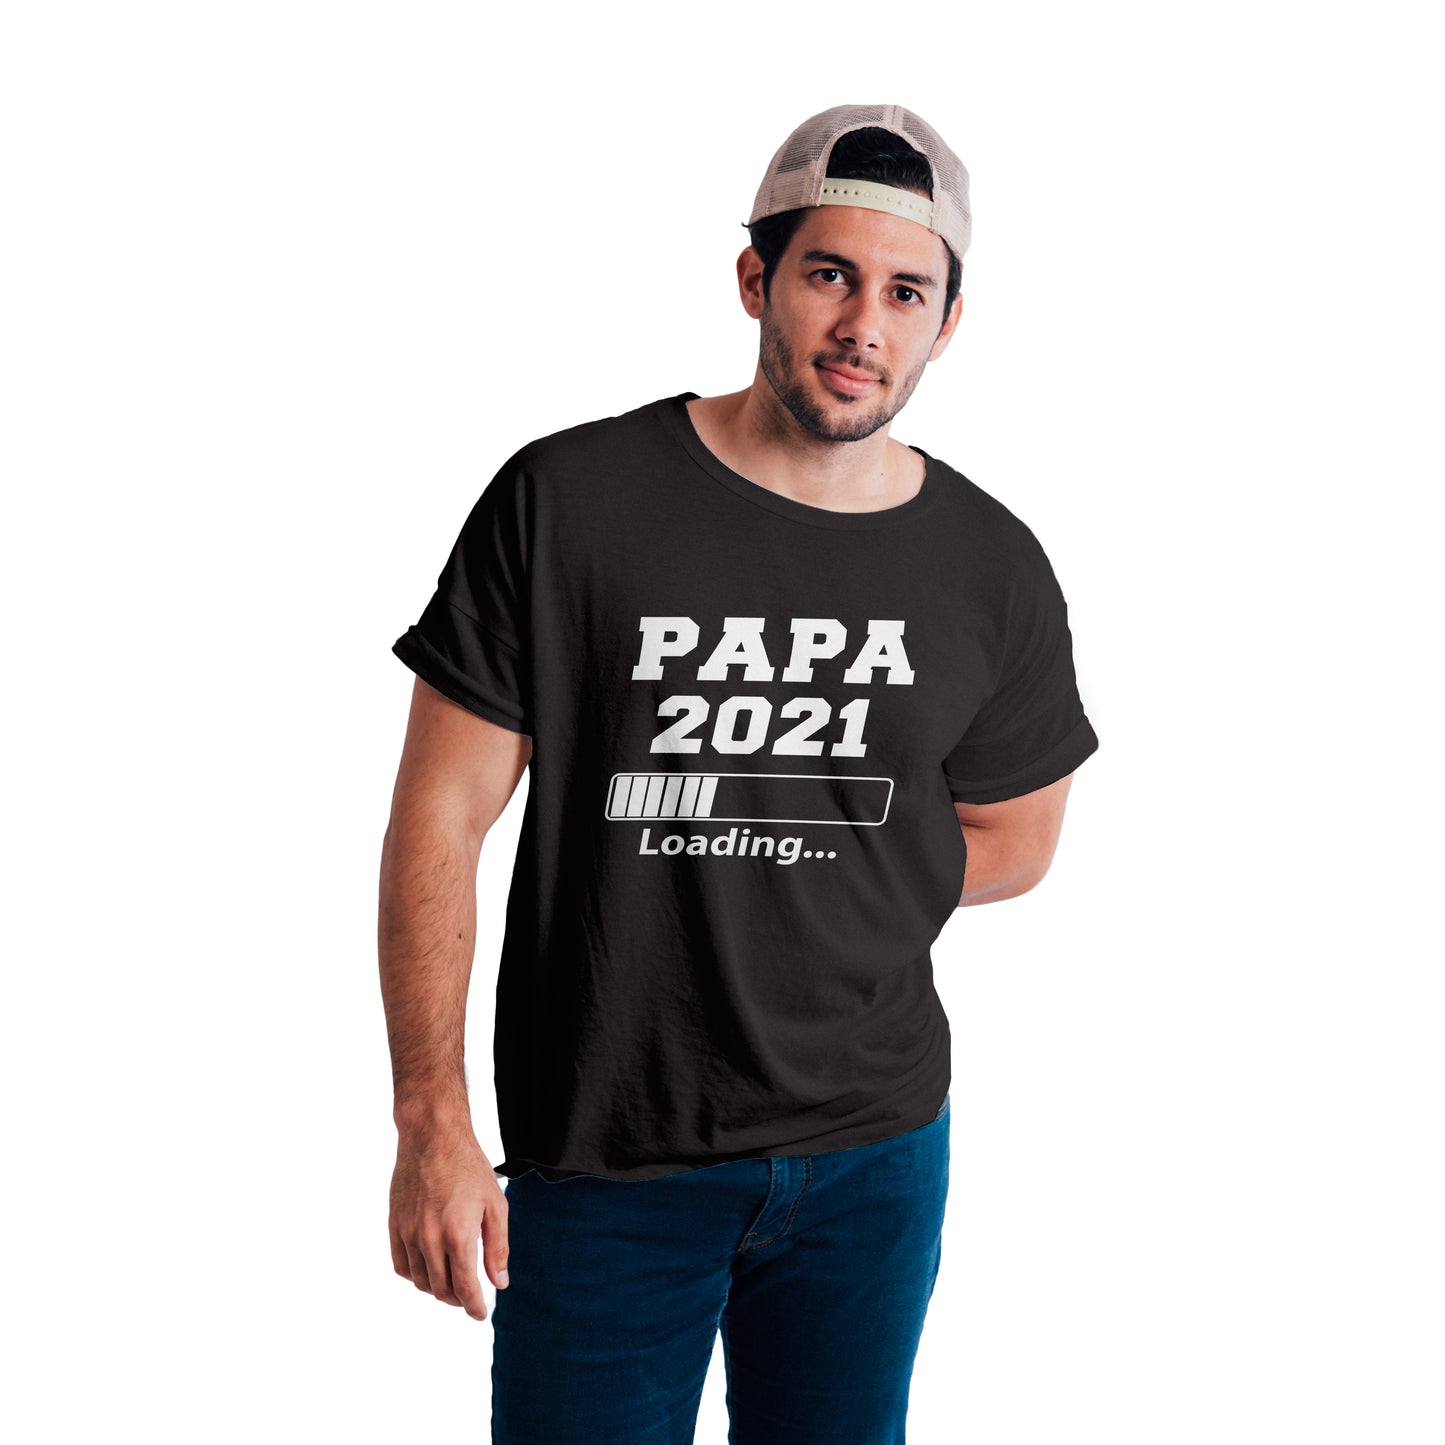 Daddy 2021 Loading Maternity t shirts for men- Black